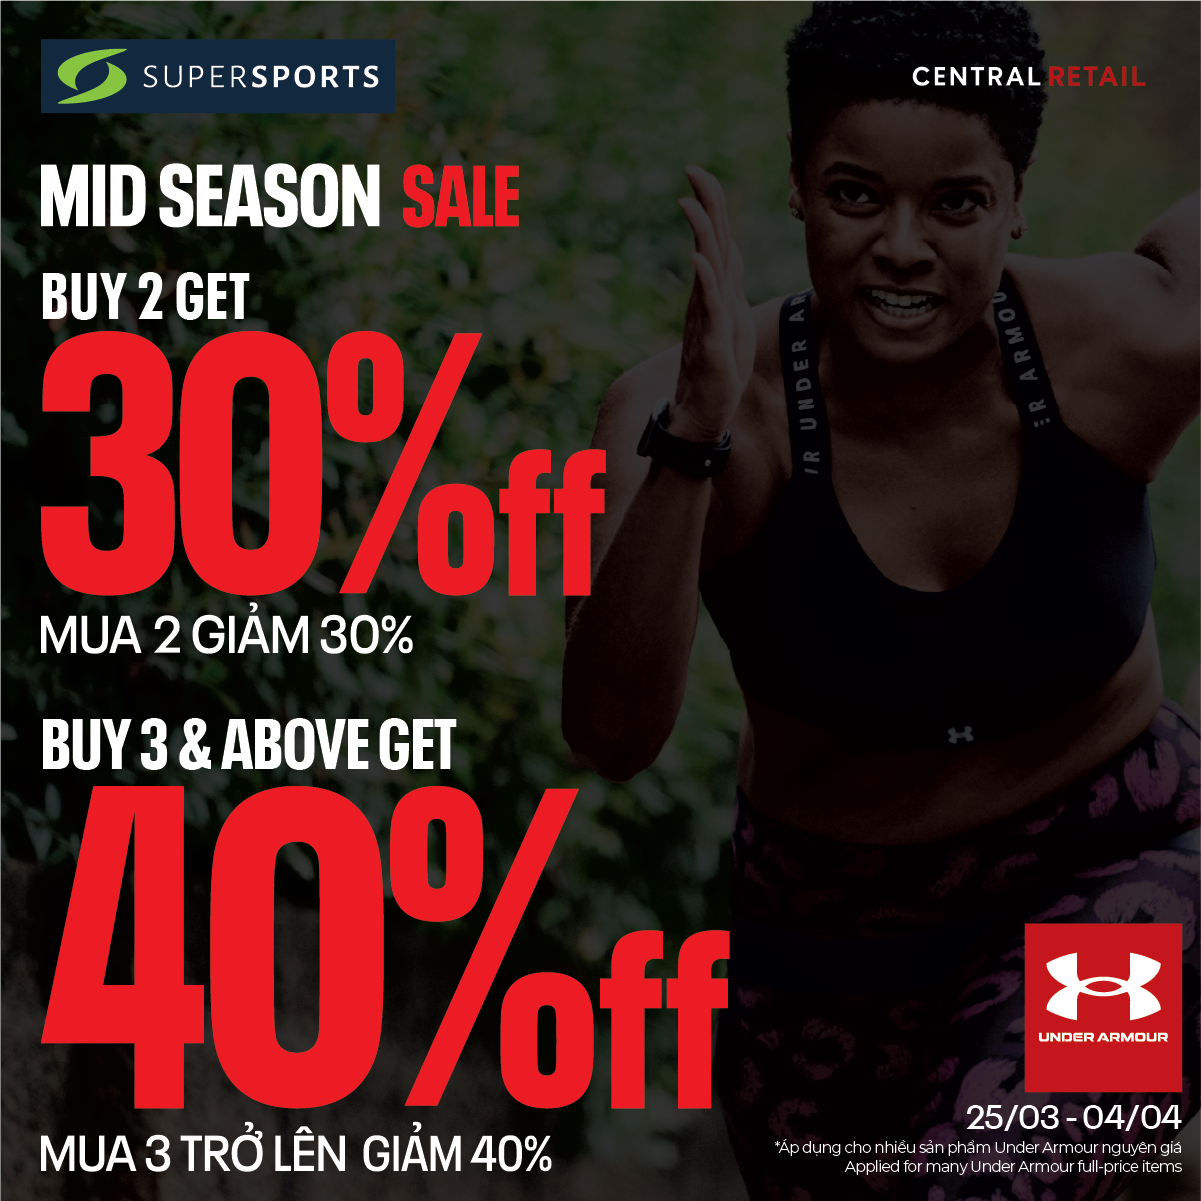 [MID SEASON SALE] UNDER ARMOUR SALE UP TO 40%  AT SUPERSPORTS STORES